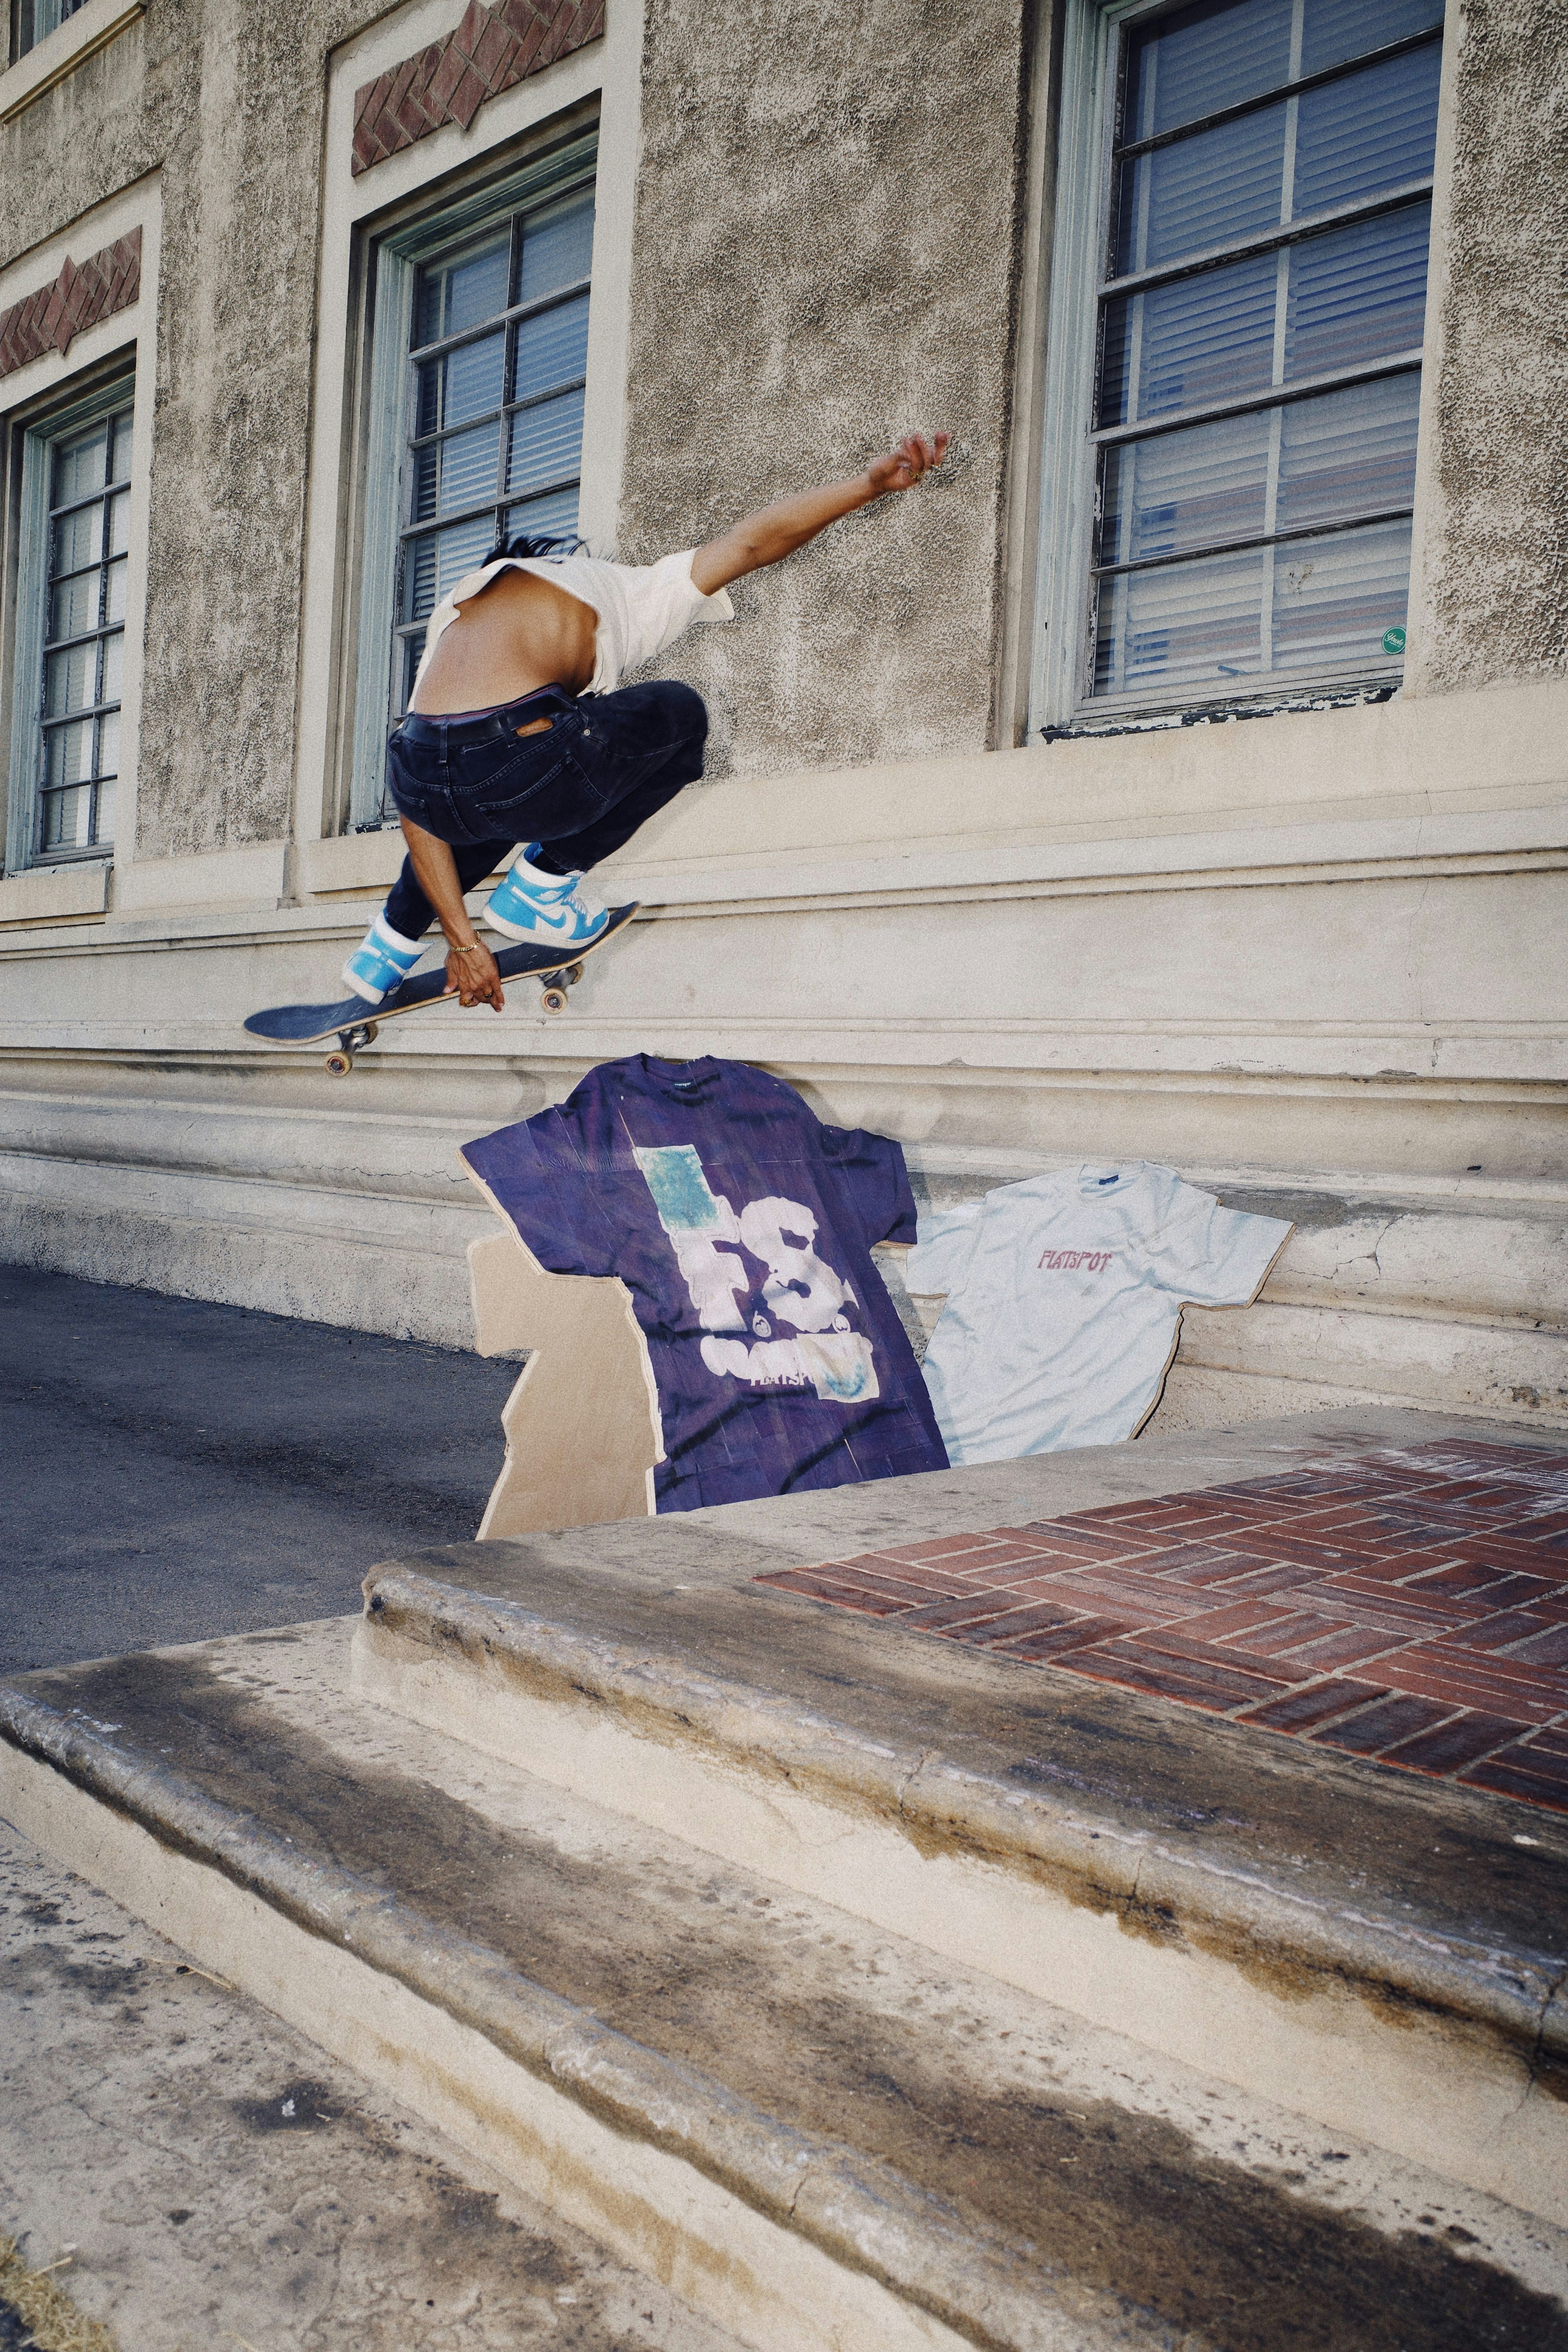 Flatspot AW21 Collection skateboarder ollie over printed wood cut-outs of the graphic tees